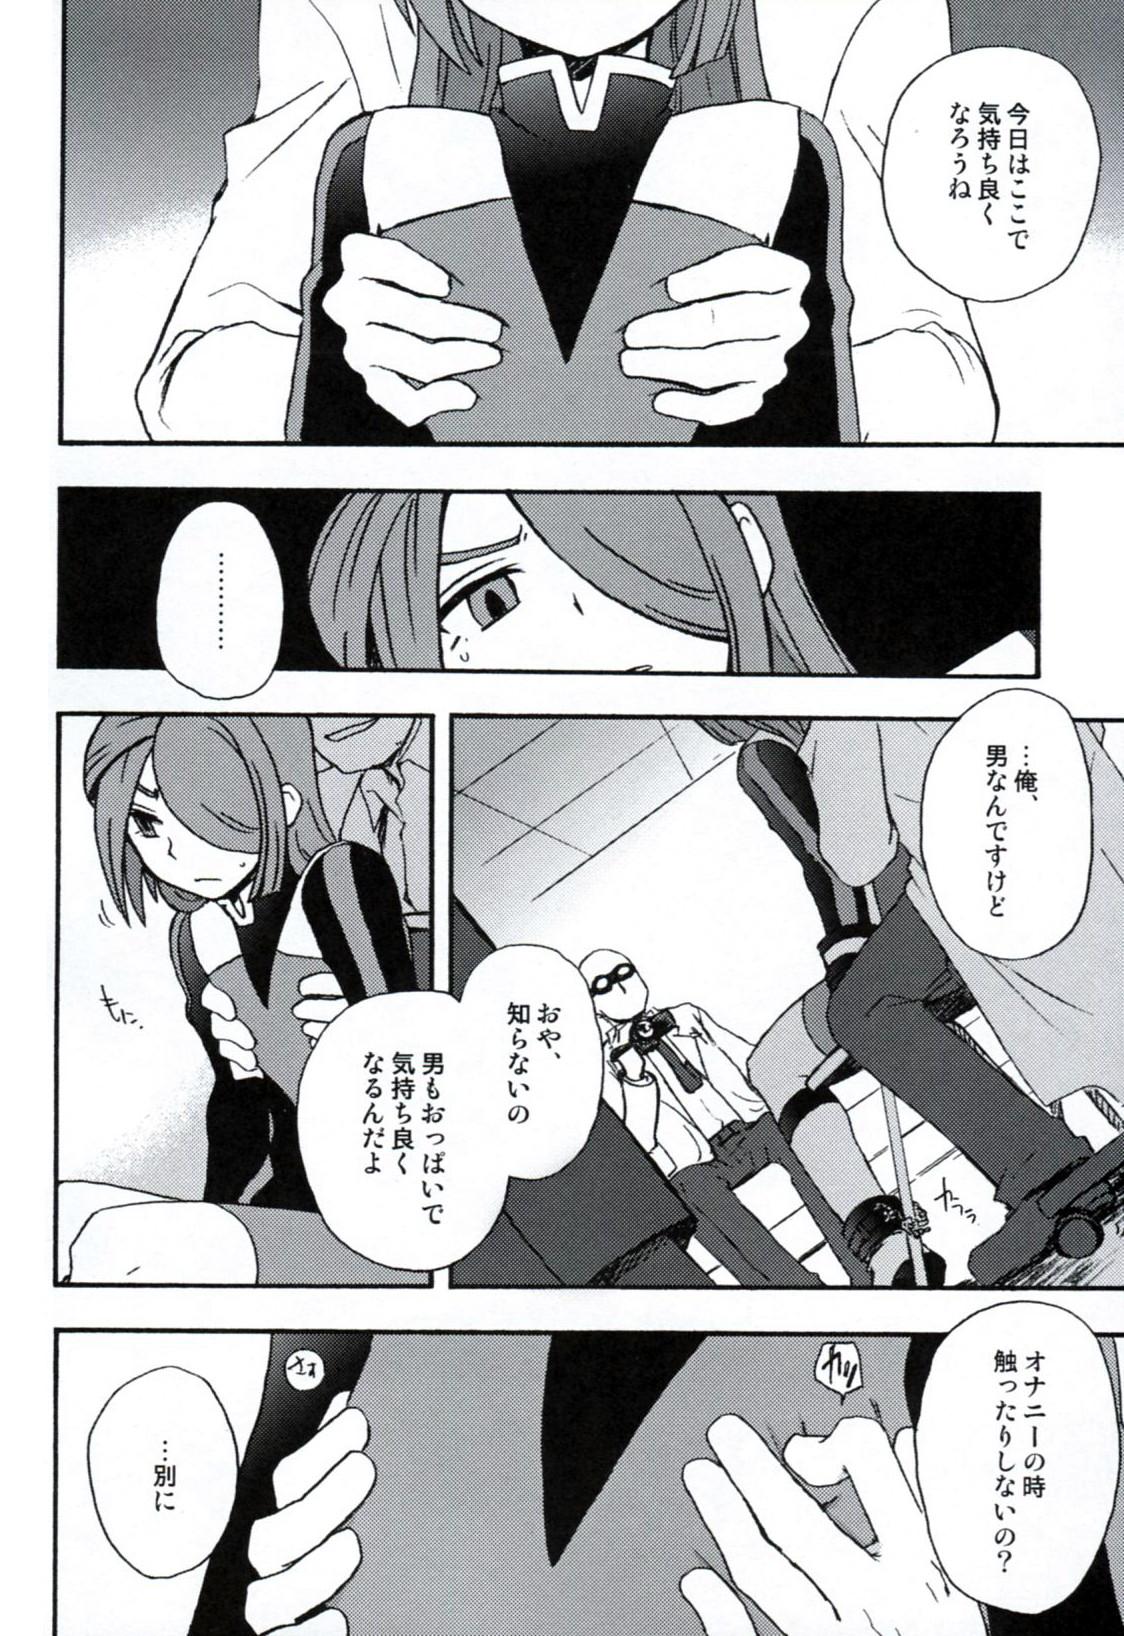 Scandal DE-10 Replay - Inazuma eleven Hair - Page 9